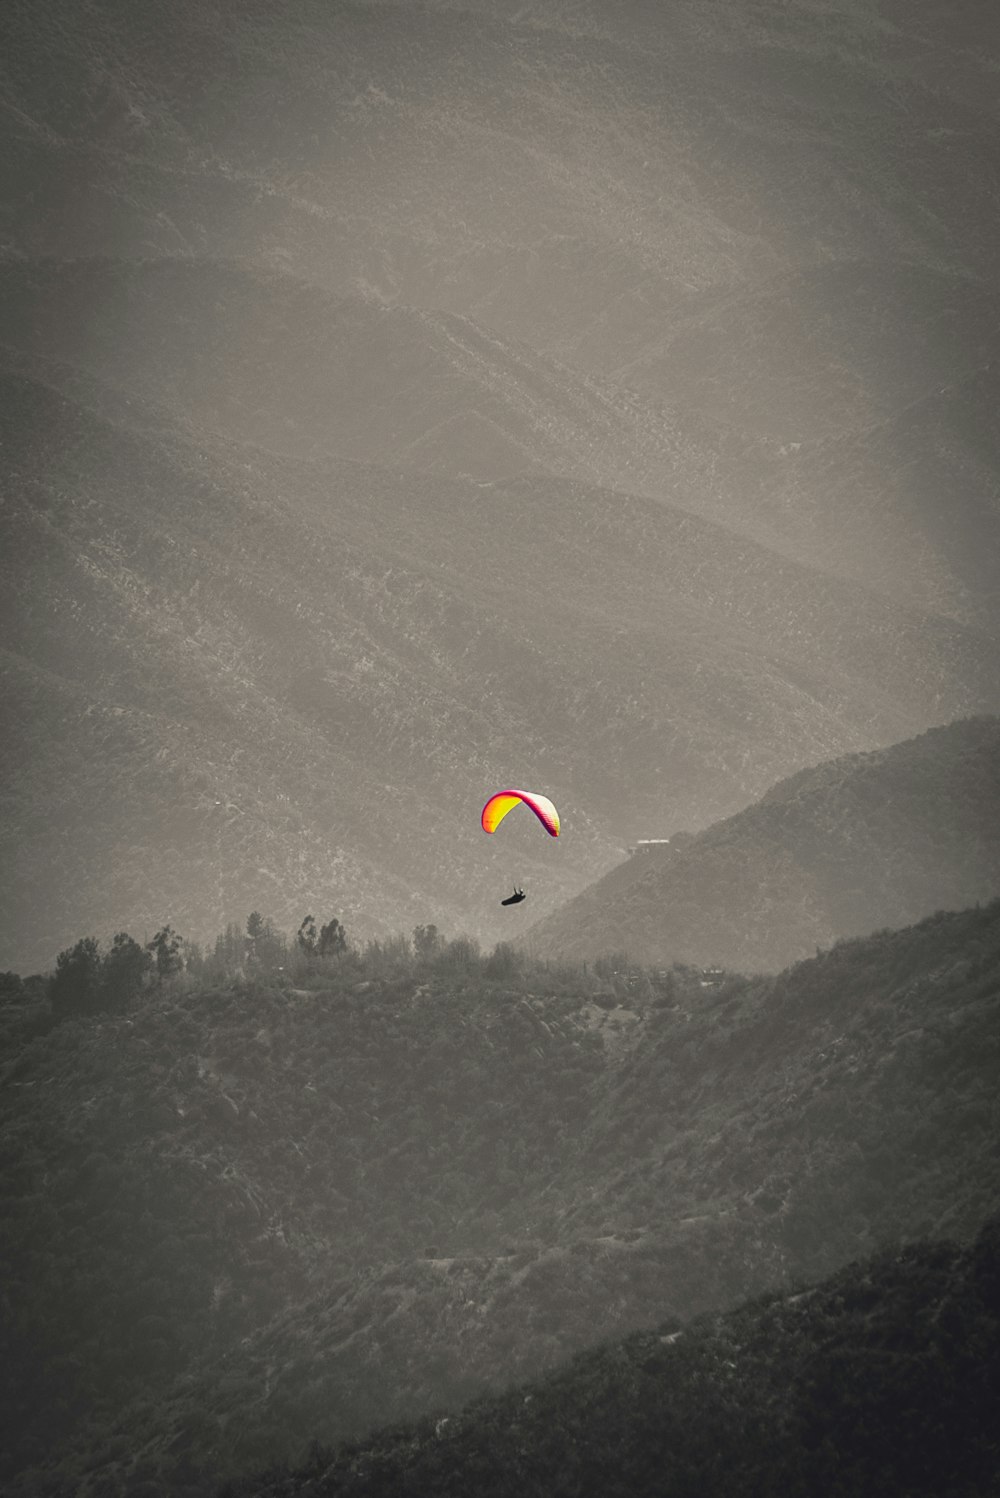 yellow and red parachute over green mountains